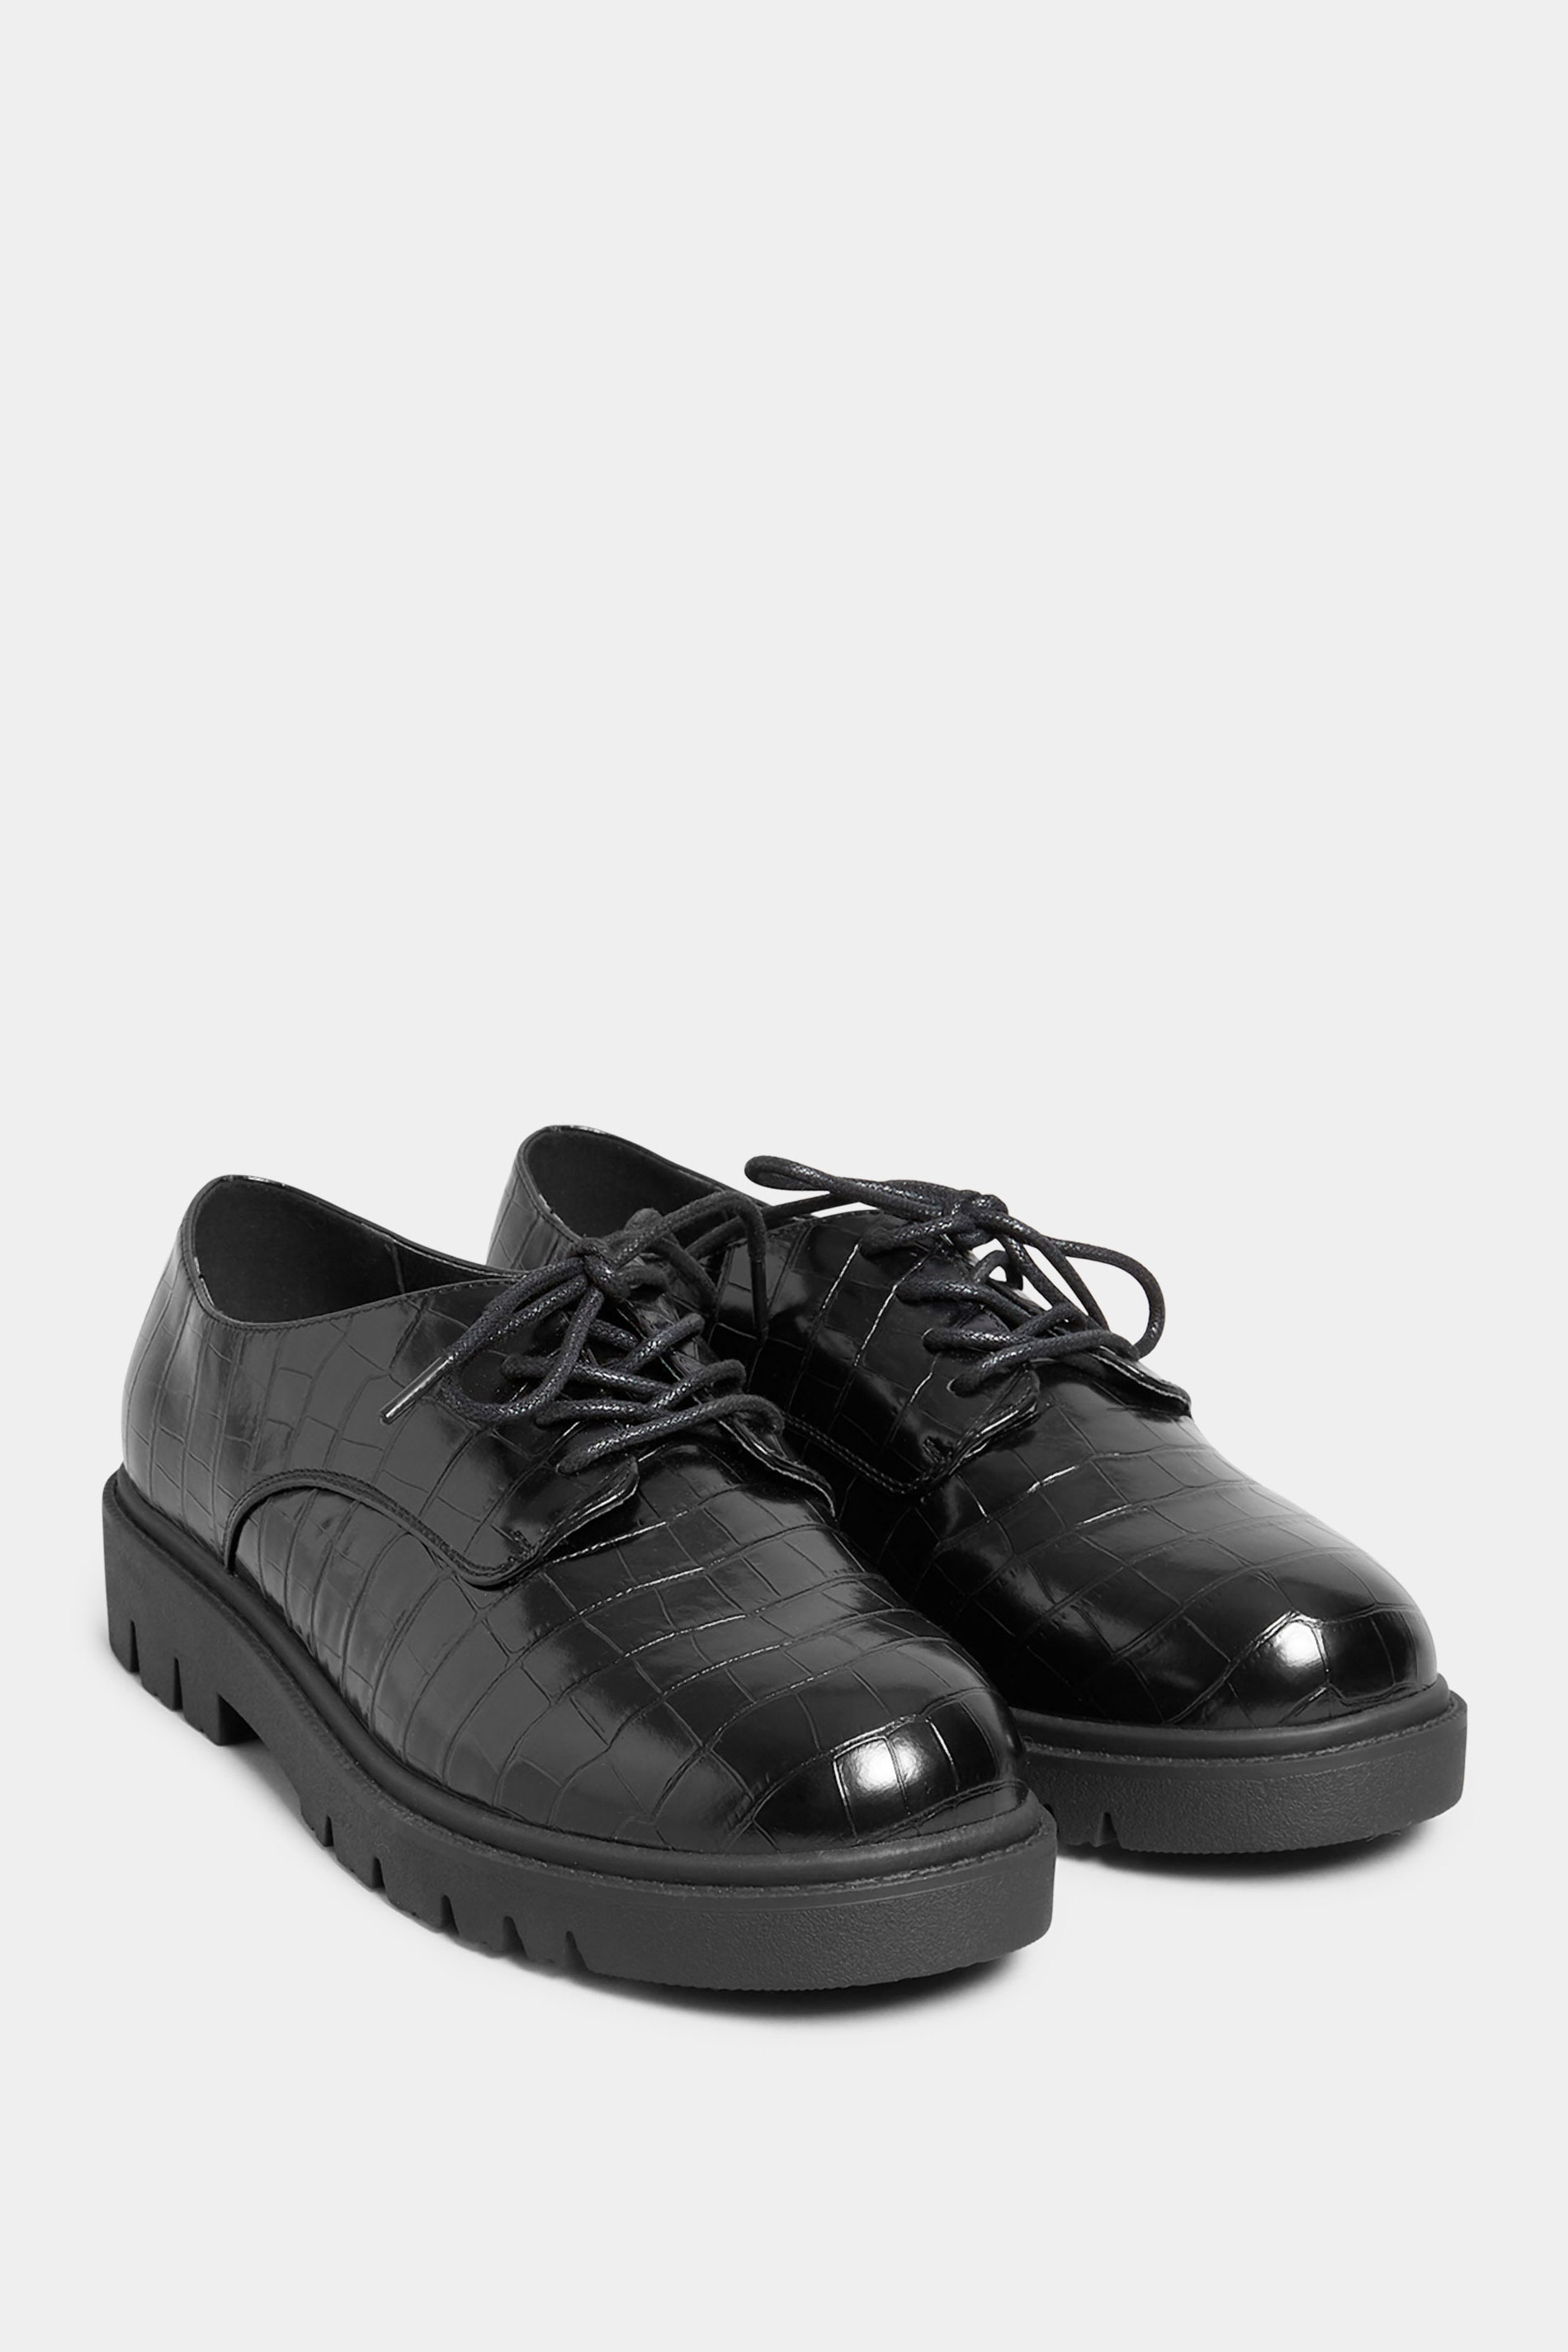 Black Croc Lace Up Loafers In Extra Wide EEE Fit | Yours Clothing 2